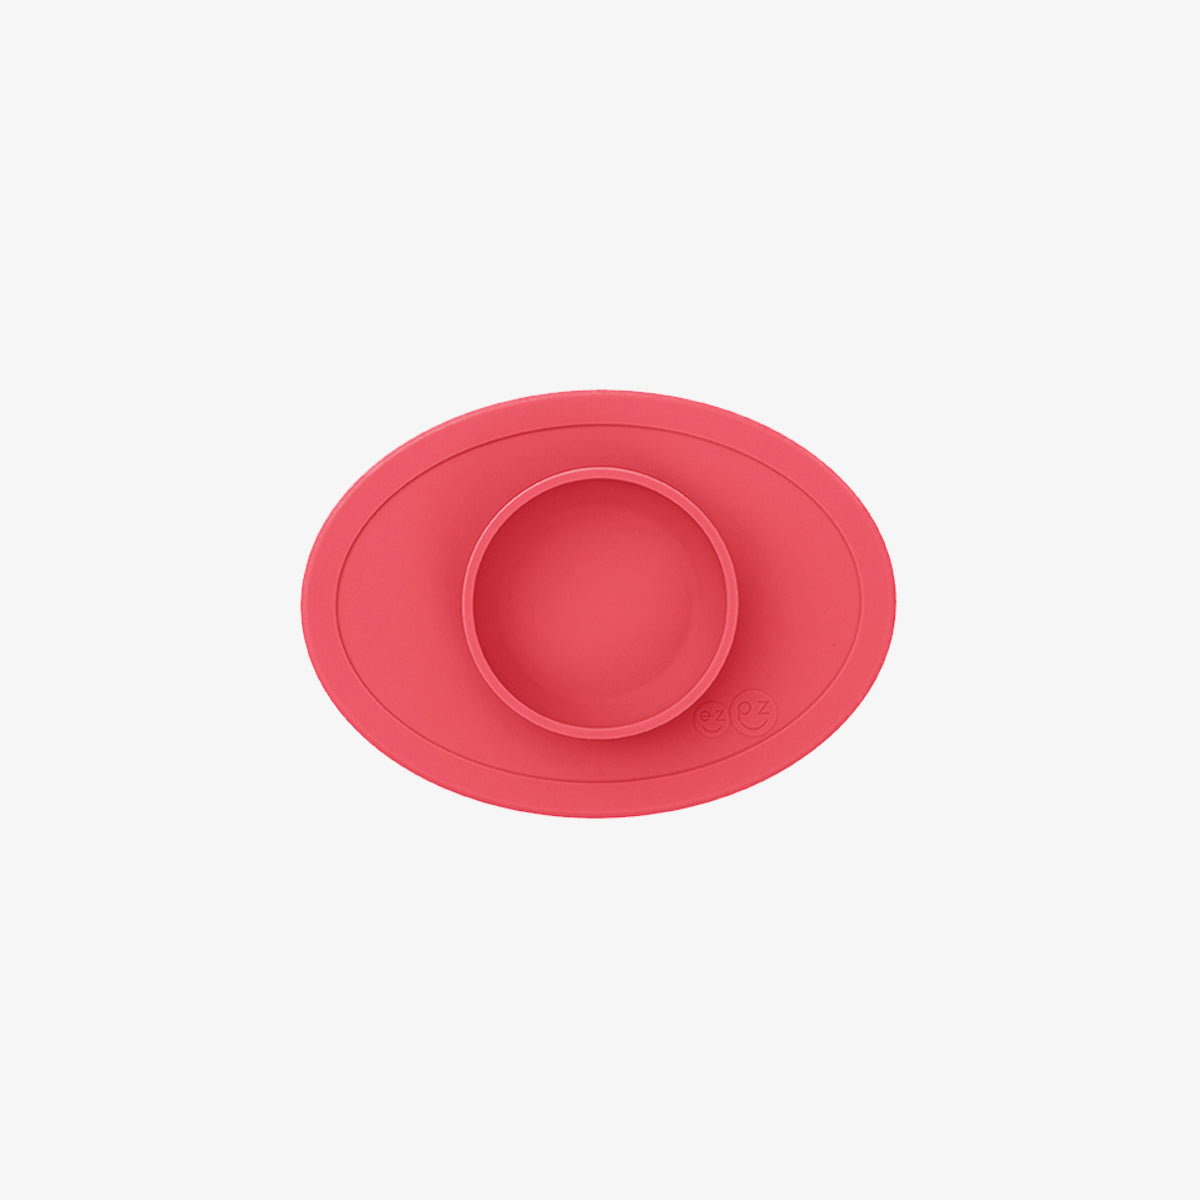 The Tiny Bowl in Coral by ezpz / Silicone Bowl for Babies that Fits on High Chairs